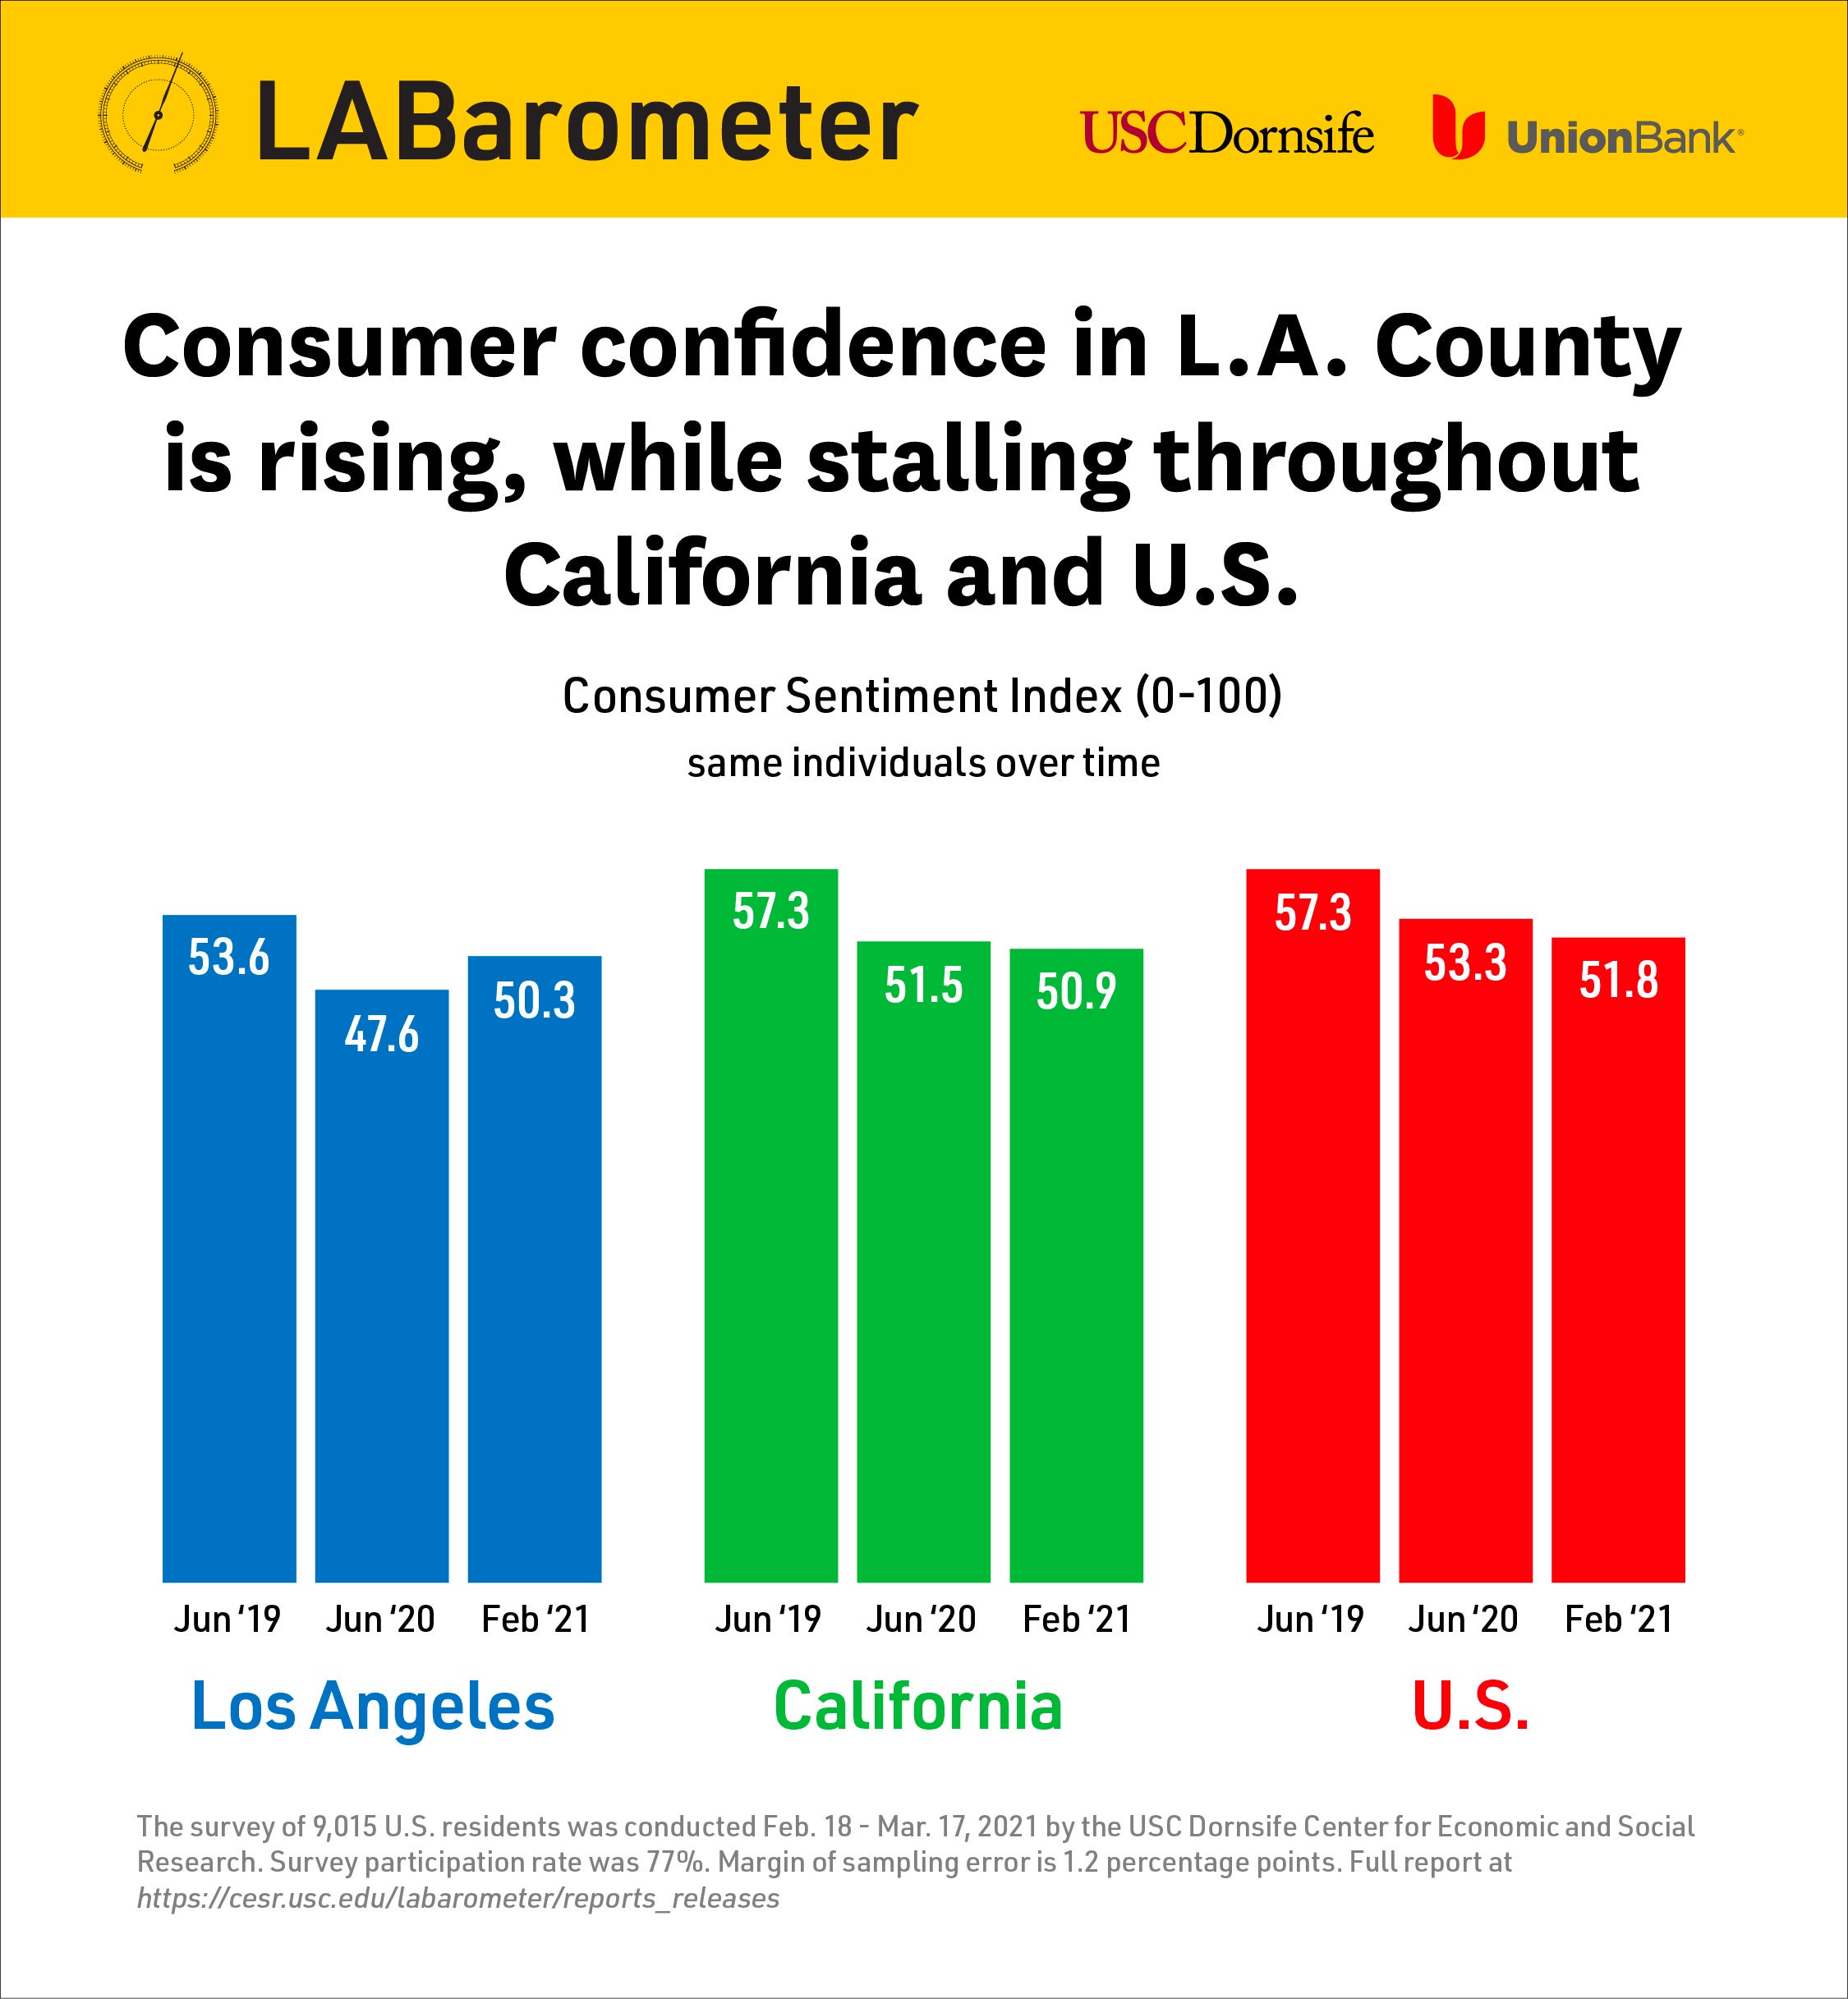 Bar graph shows consumer confidence in L.A. County is rising as it stalls in California and the U.S.